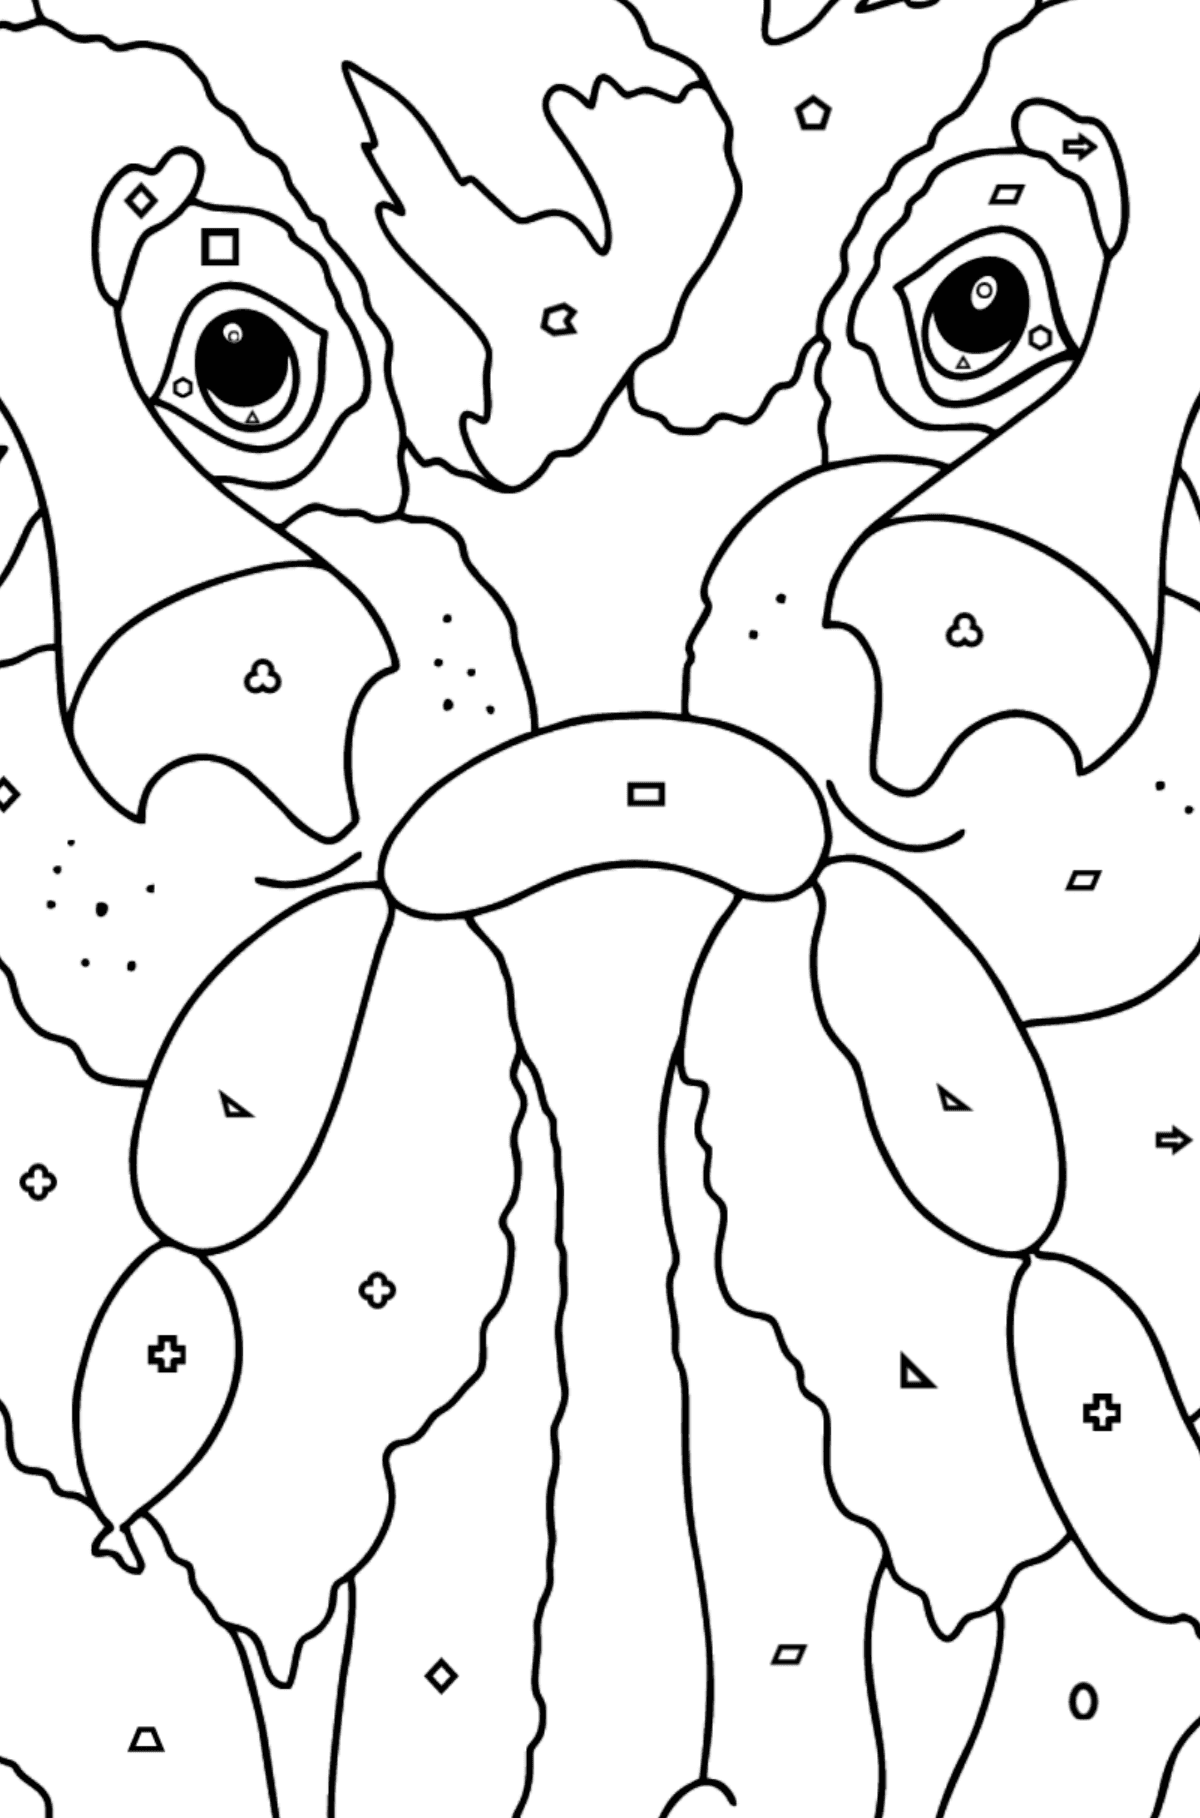 Coloring Page - Dogs Found Sausages - Coloring by Geometric Shapes for Kids